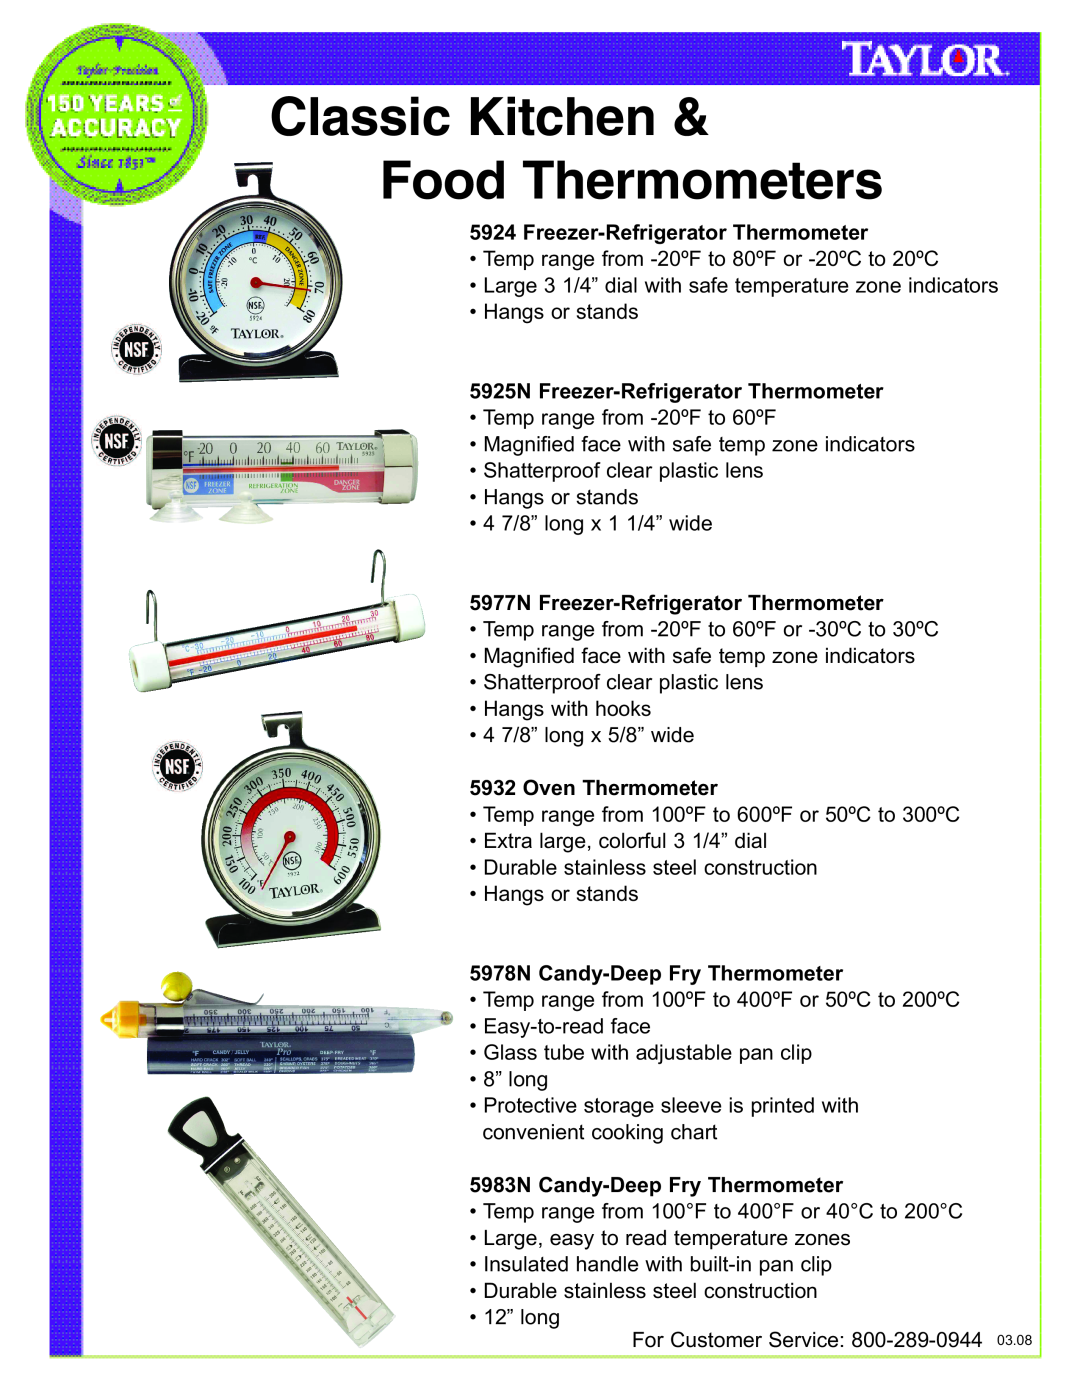 Taylor 5983N, 5932, 5925N manual Classic Kitchen & Food Thermometers, Freezer-Refrigerator Thermometer, Oven Thermometer 